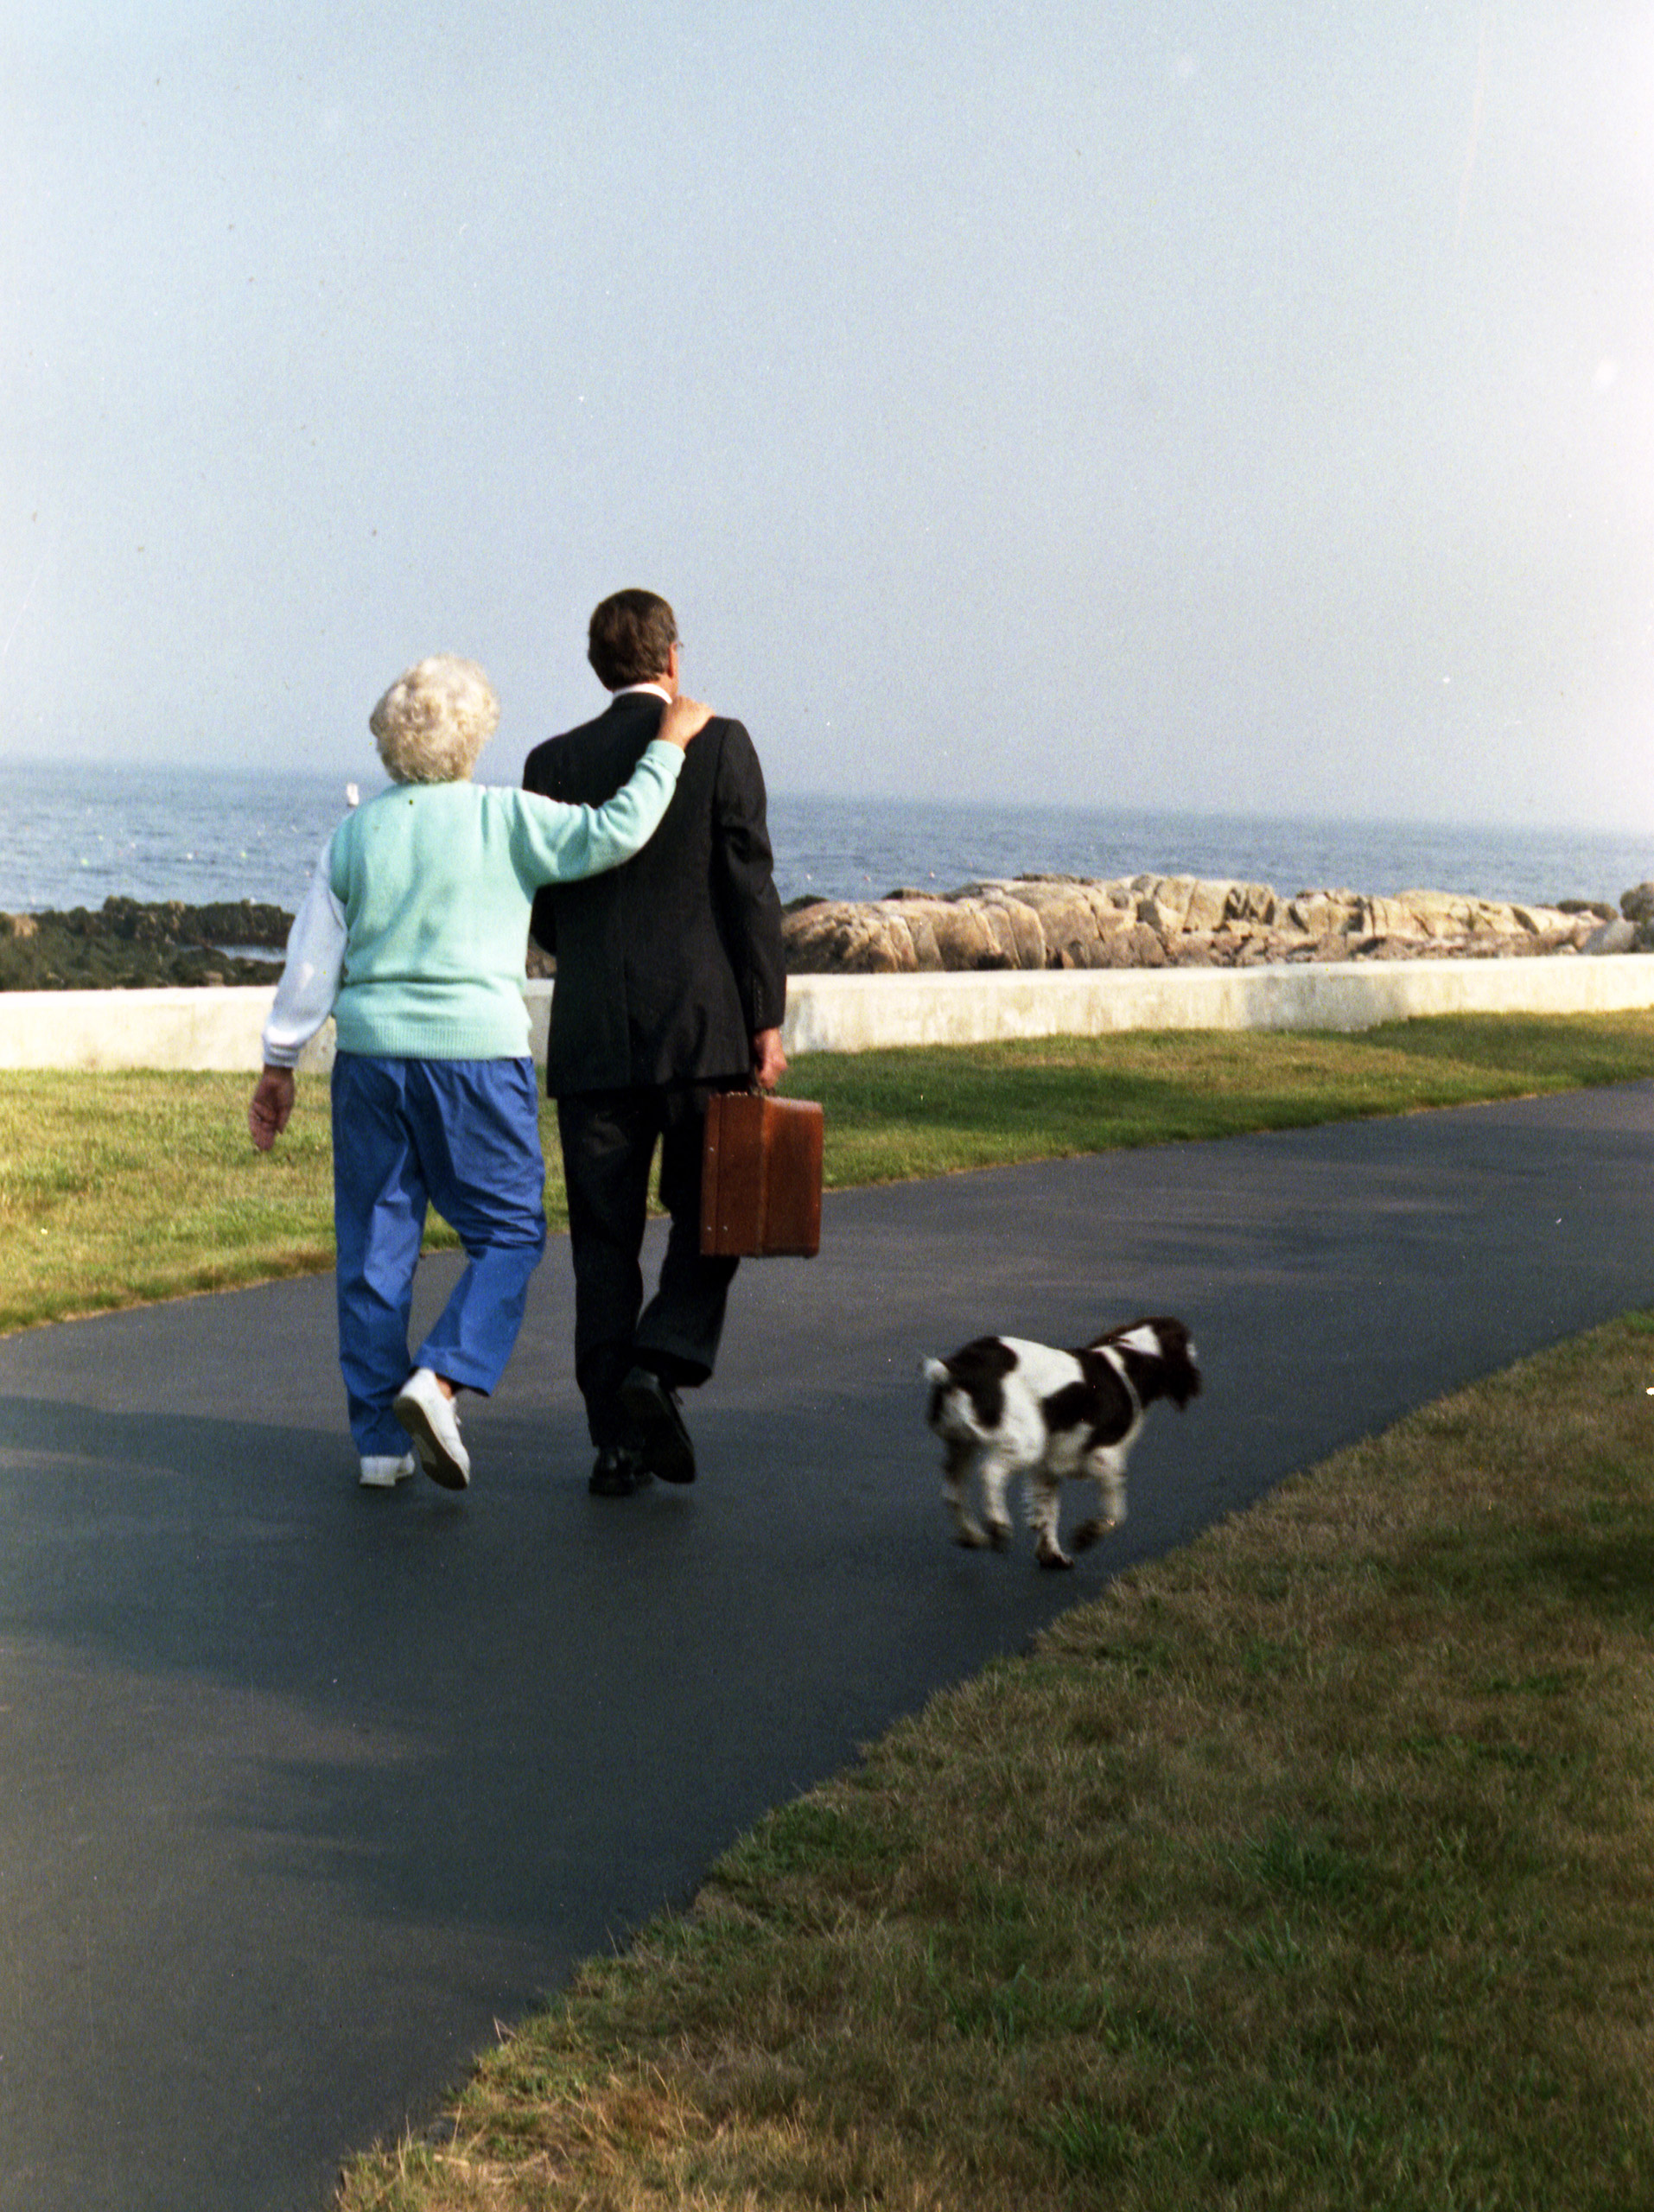 President George H.W. and Mrs. Barbara Bush walk down the driveway as Millie trots alongside, Walker's Point, Kennebunkport, ME, Aug. 16, 1989.